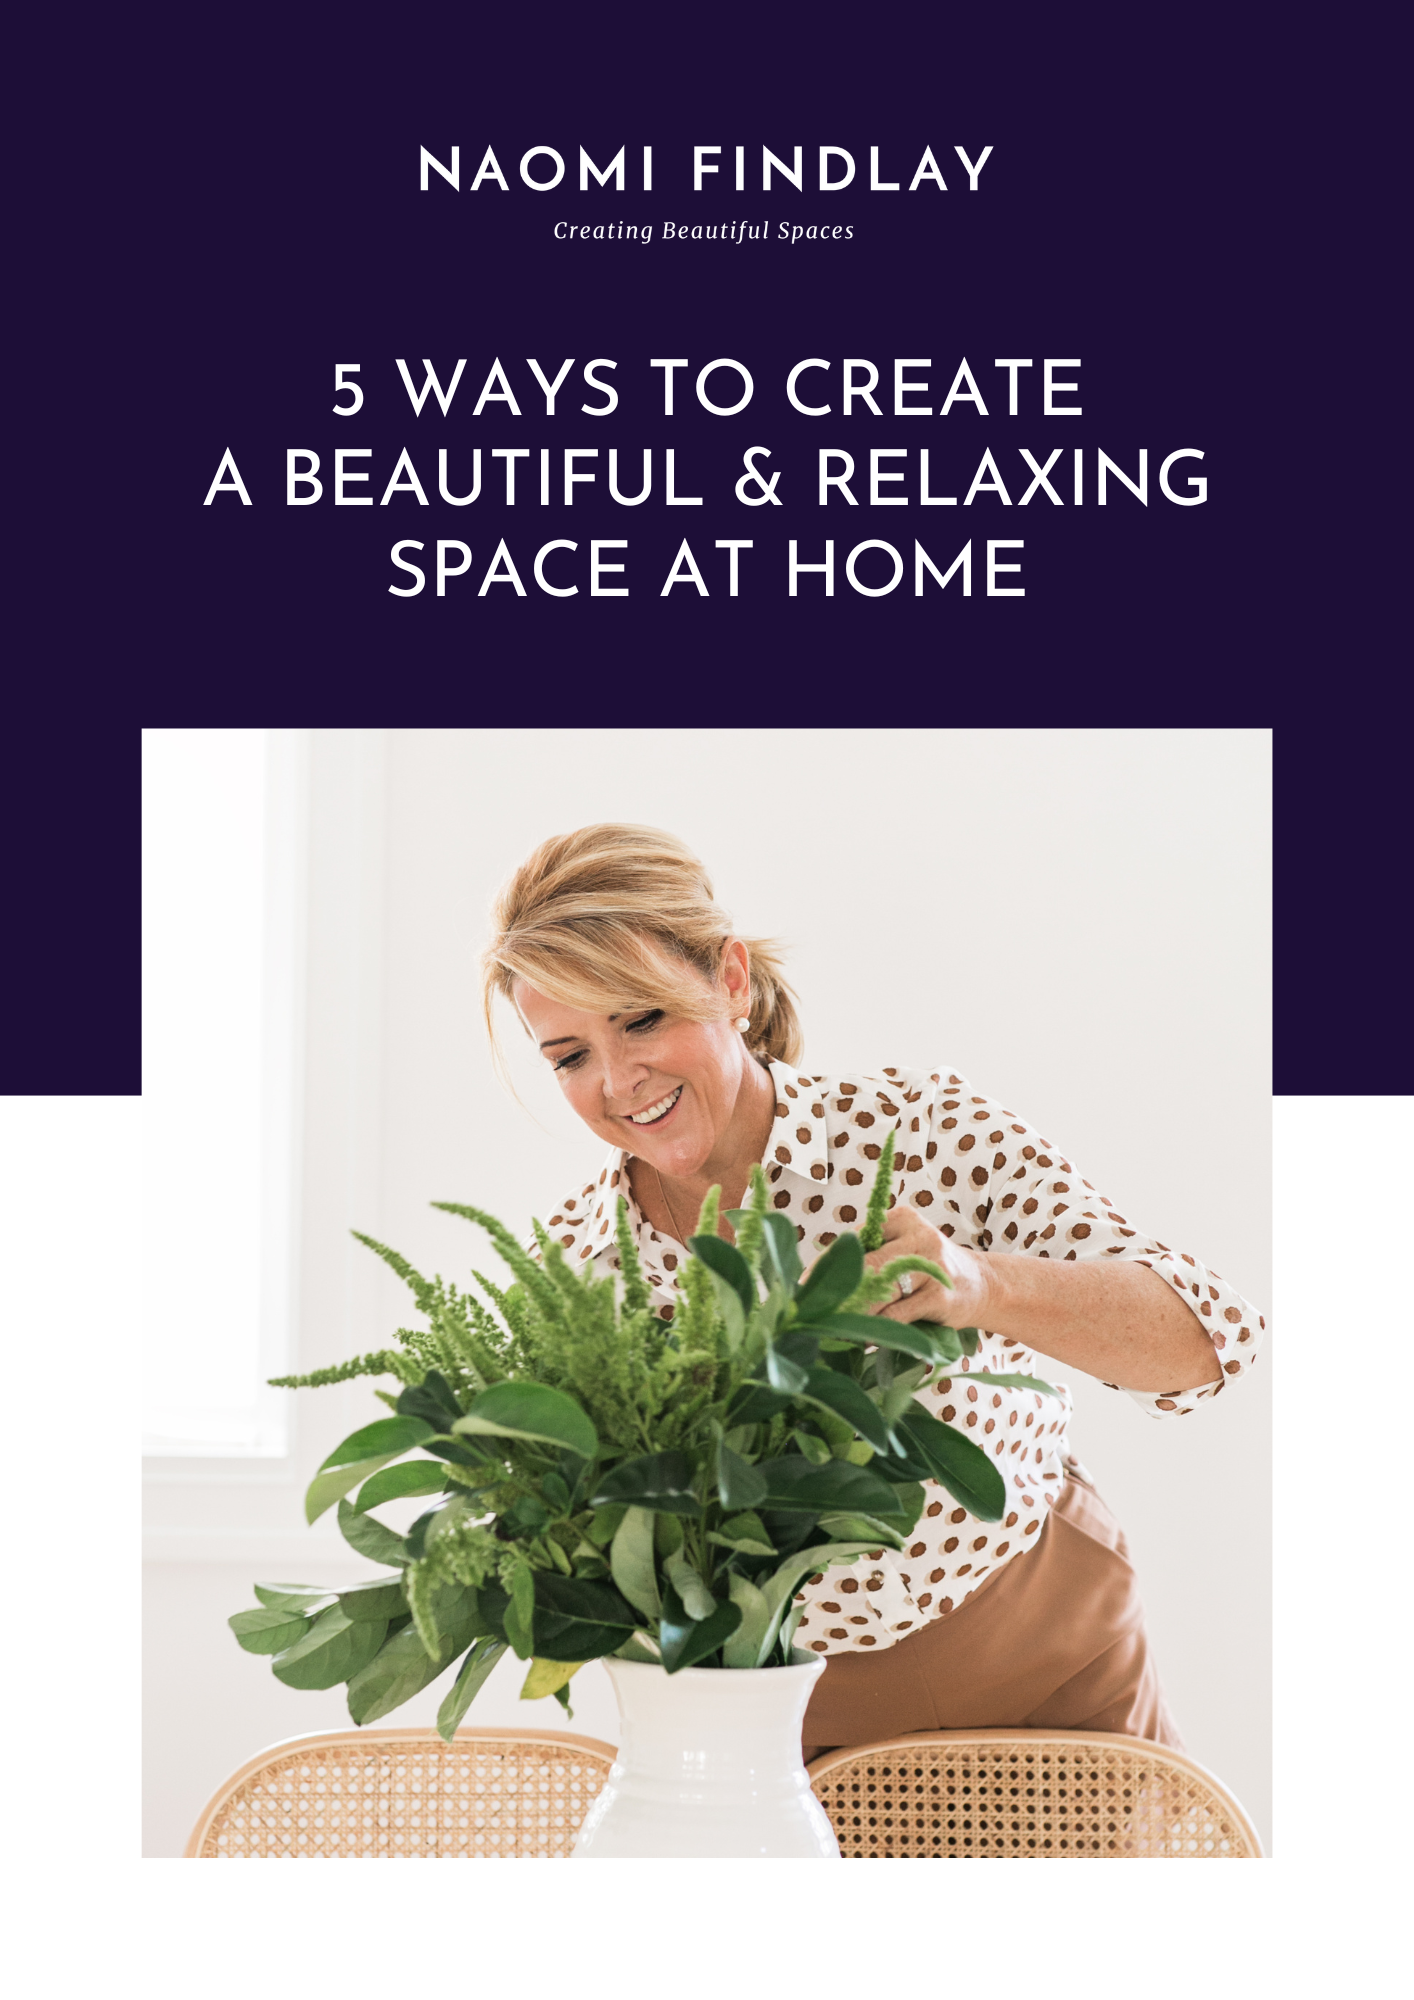 5 Ways to Create a Beautiful & Relaxing Space at Home cover image